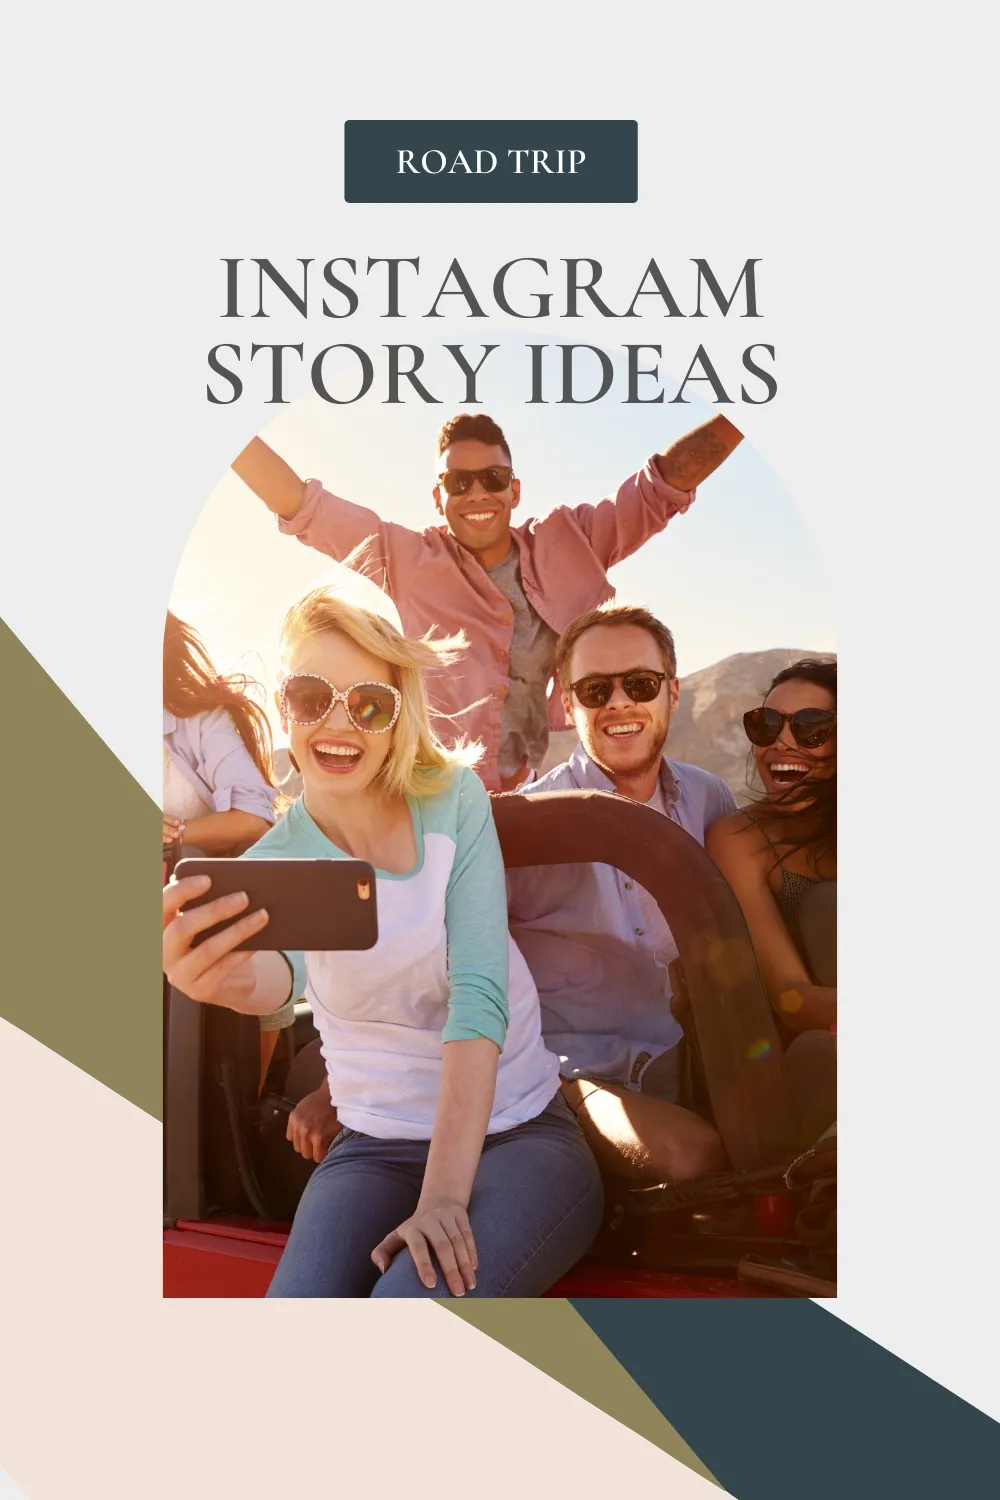 Hitting the open road? Instagram stories are one of the best ways to take your friends, family, and followers along for the ride on your road trip. But, with so many possibilities, it is easy to get overwhelmed and be at a loss for road trip Instagram story ideas. Read on for the best road trip Instagram story ideas, tell you what features will enhance your stories, and give you plenty of road trip captions, quotes, graphics, and games you can share with your audience. #RoadTrip